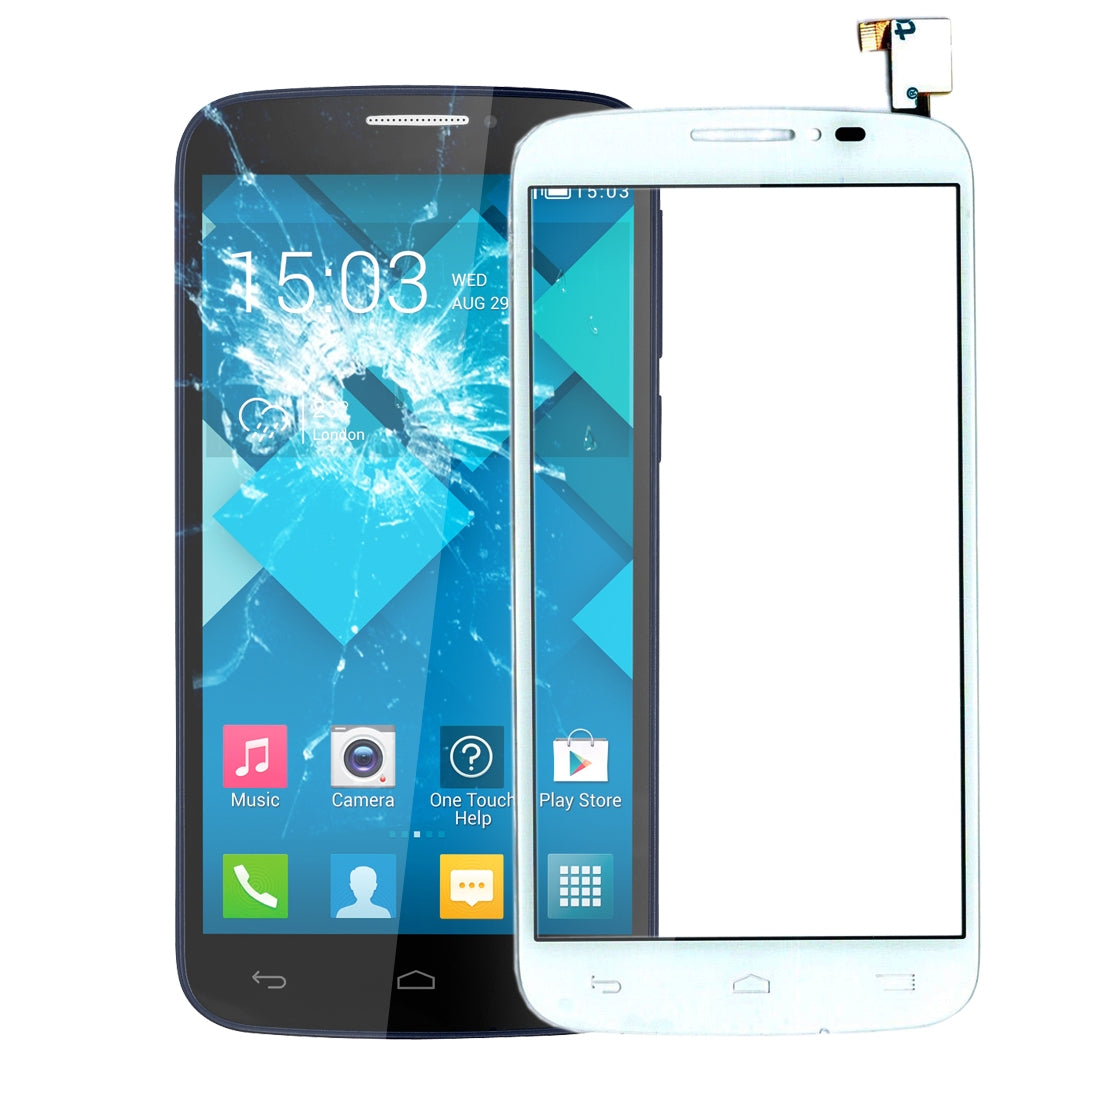 grond draai commando Touch Screen Digitizer Alcatel One Touch Pop C7 7040 / 7041 White